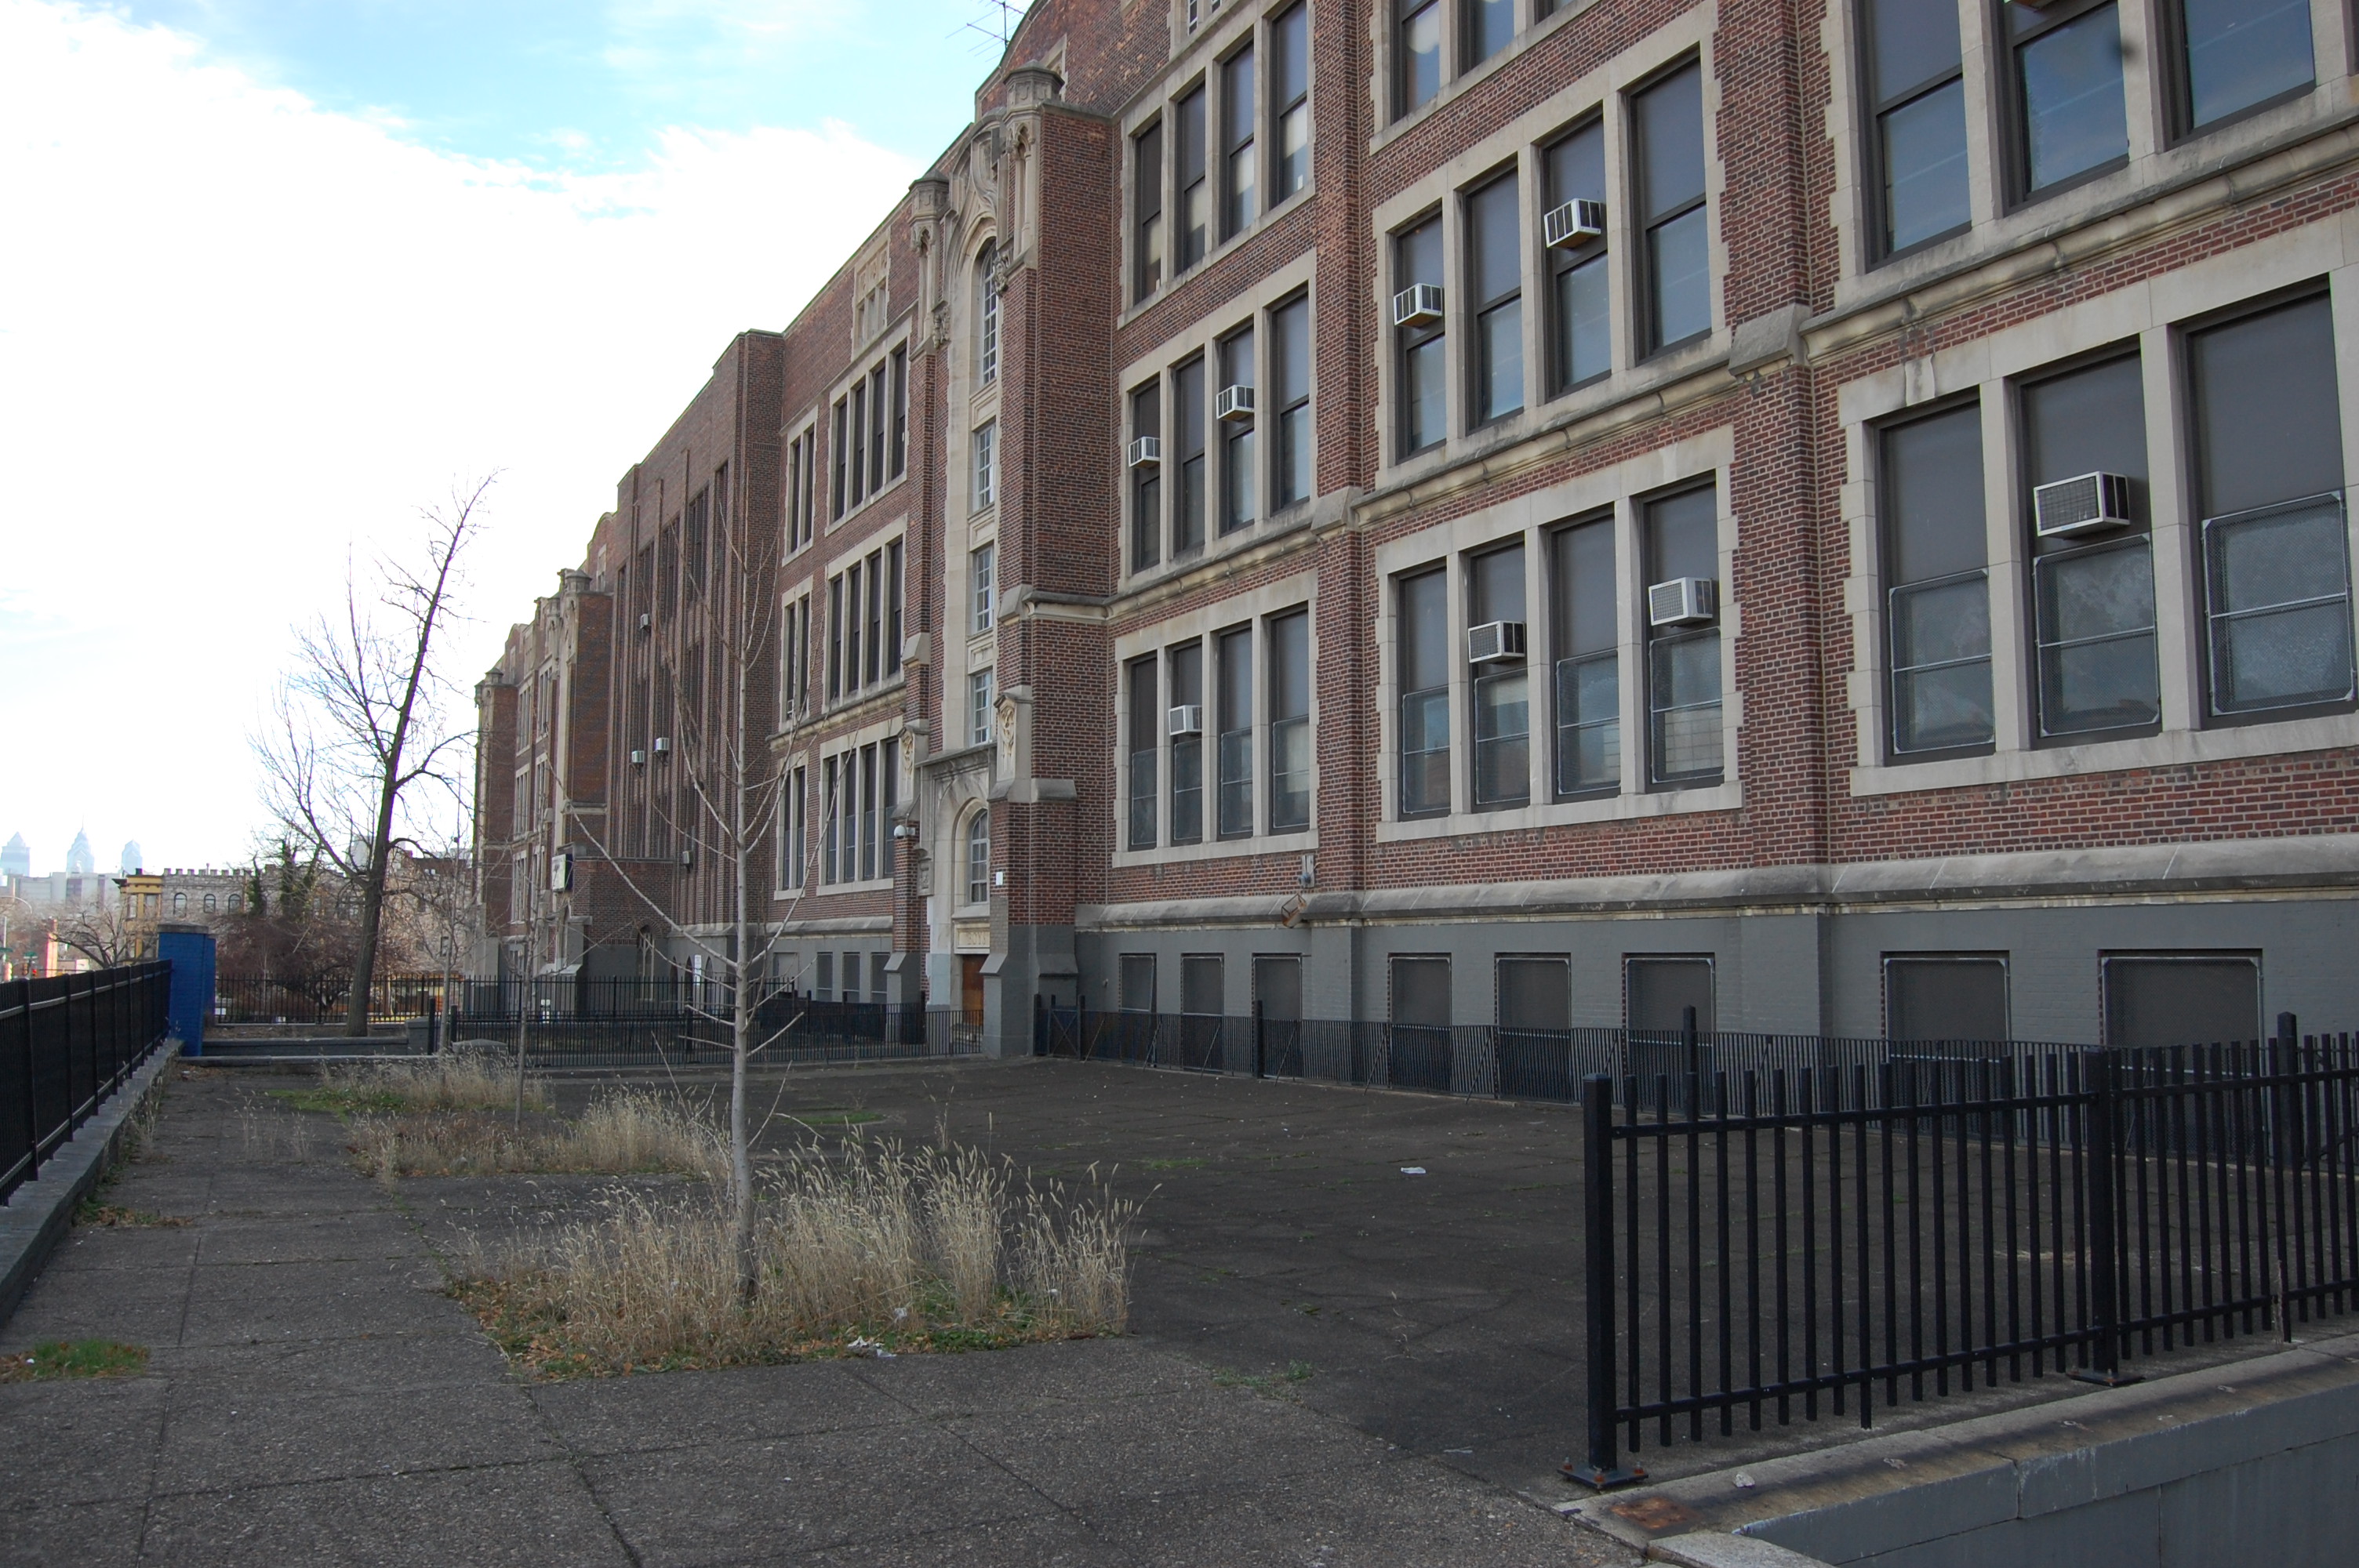 District sets $6.5 million sale price for old West Philly High building